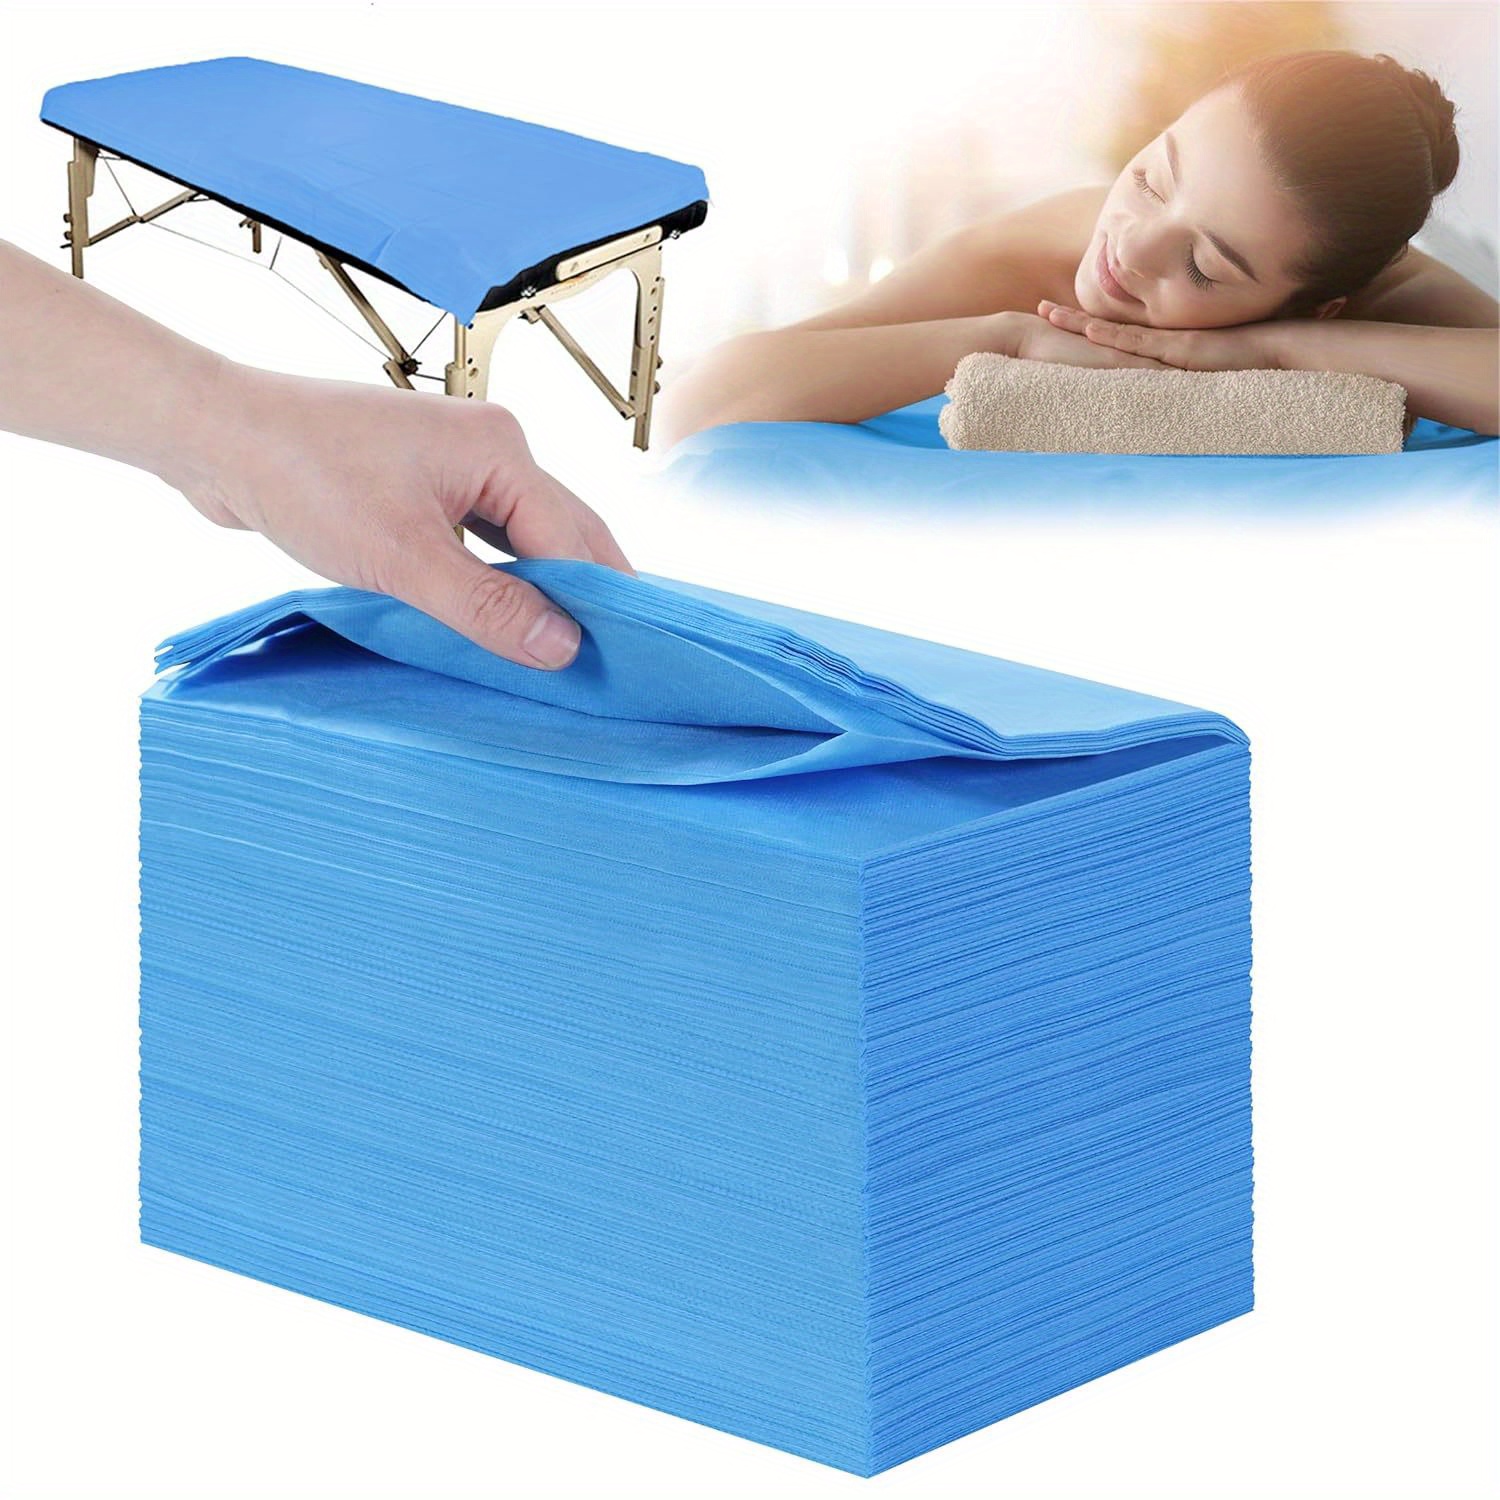 

100pcs Massage Table Sheets, Disposable Non Woven Spa Bed Cover Breathable Polypropylene Fabric, Not Waterproof